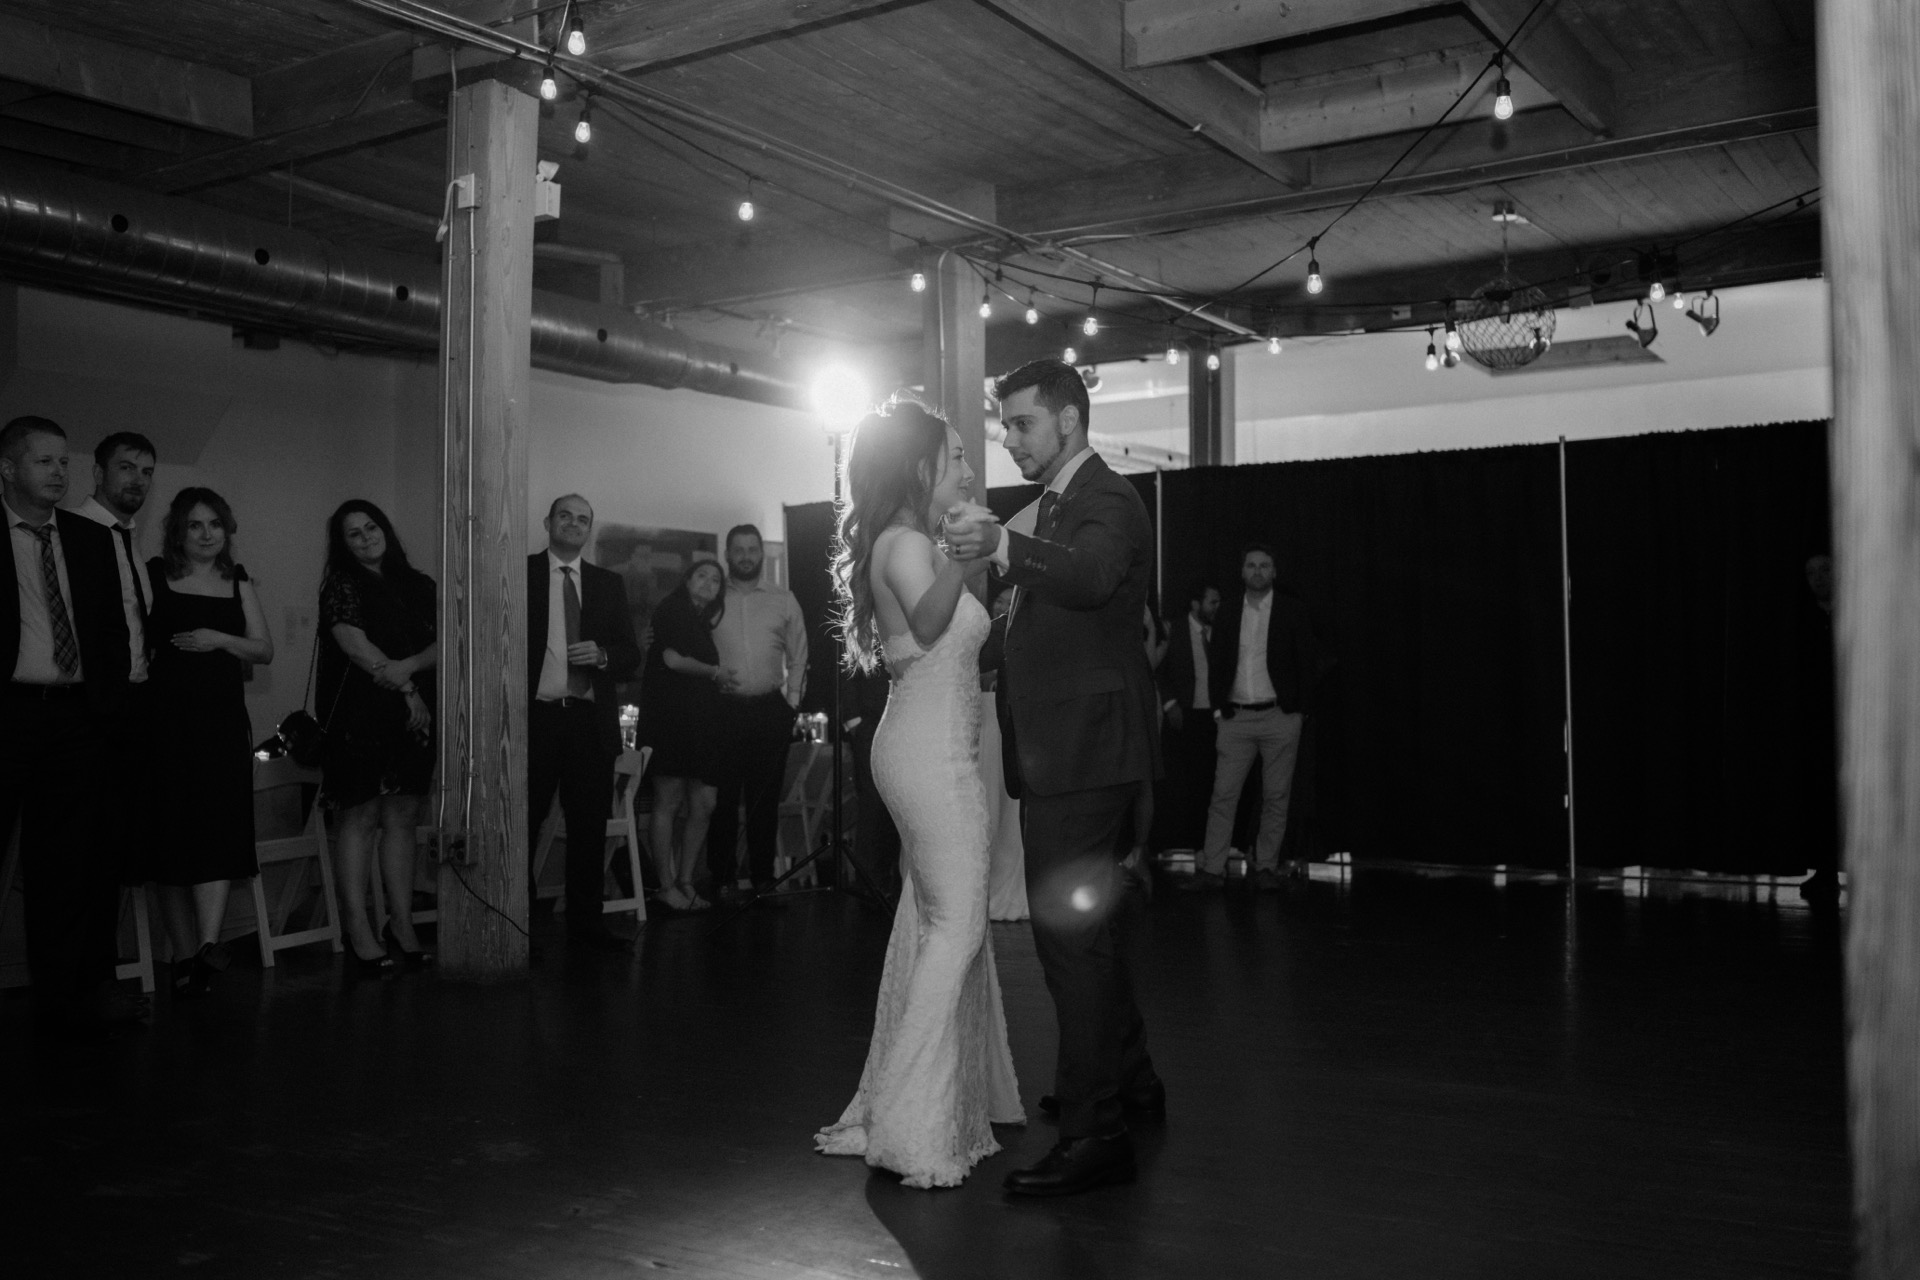 A couple shares a dance in a dimly lit room as onlookers surround them.